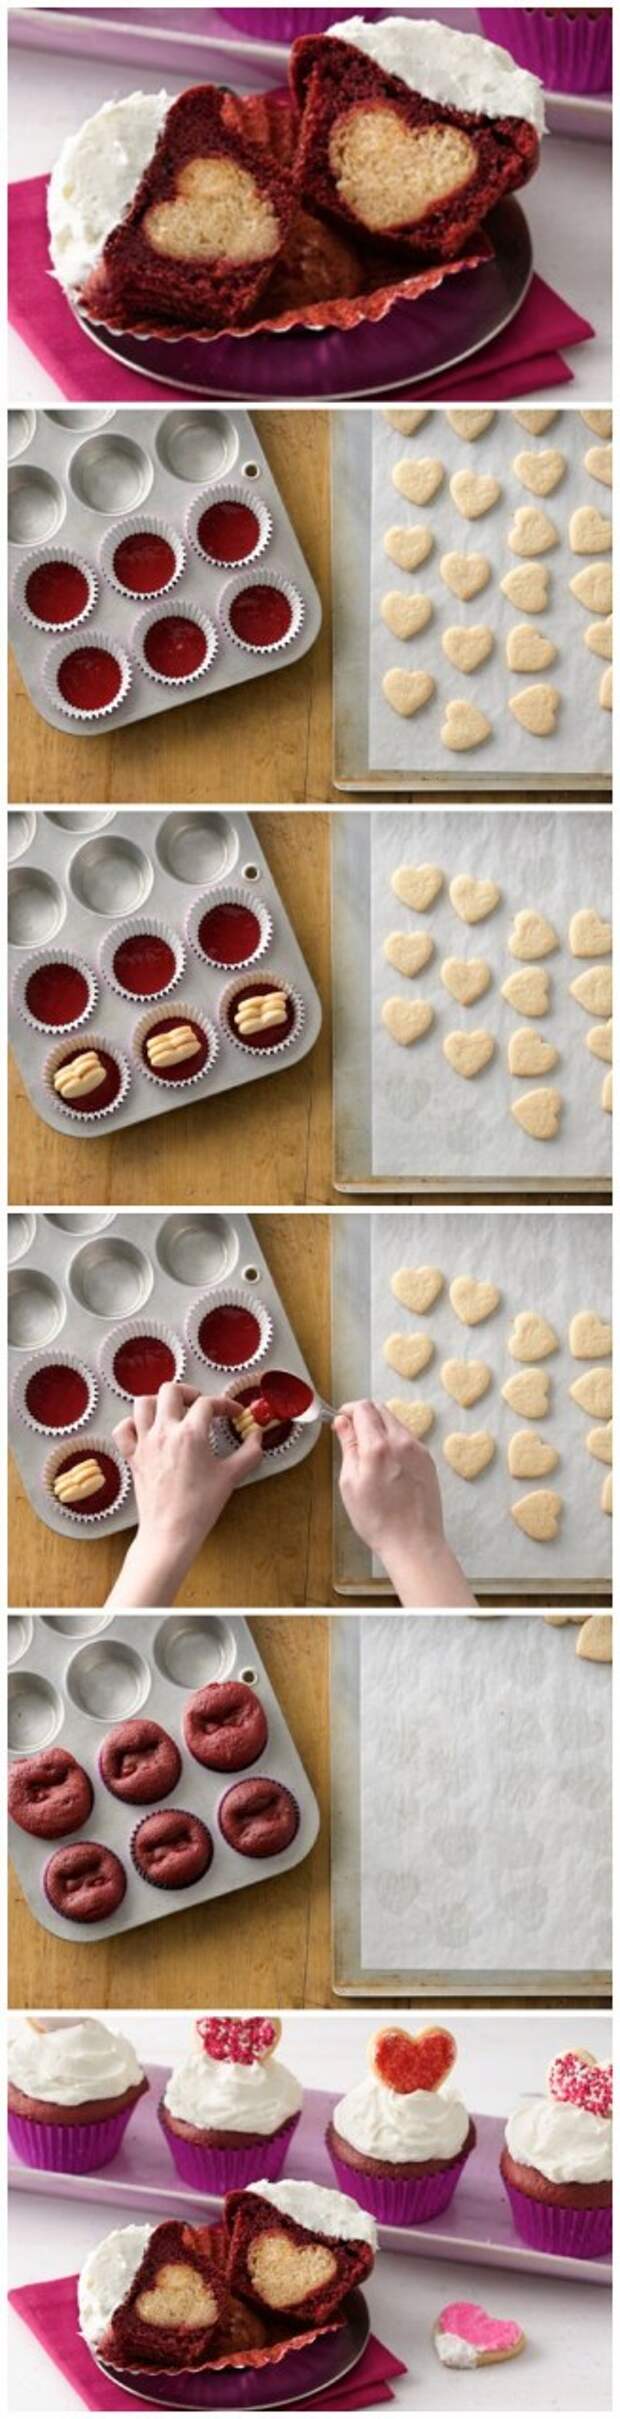 How To Make Surprise-Inside Cupcakes: 